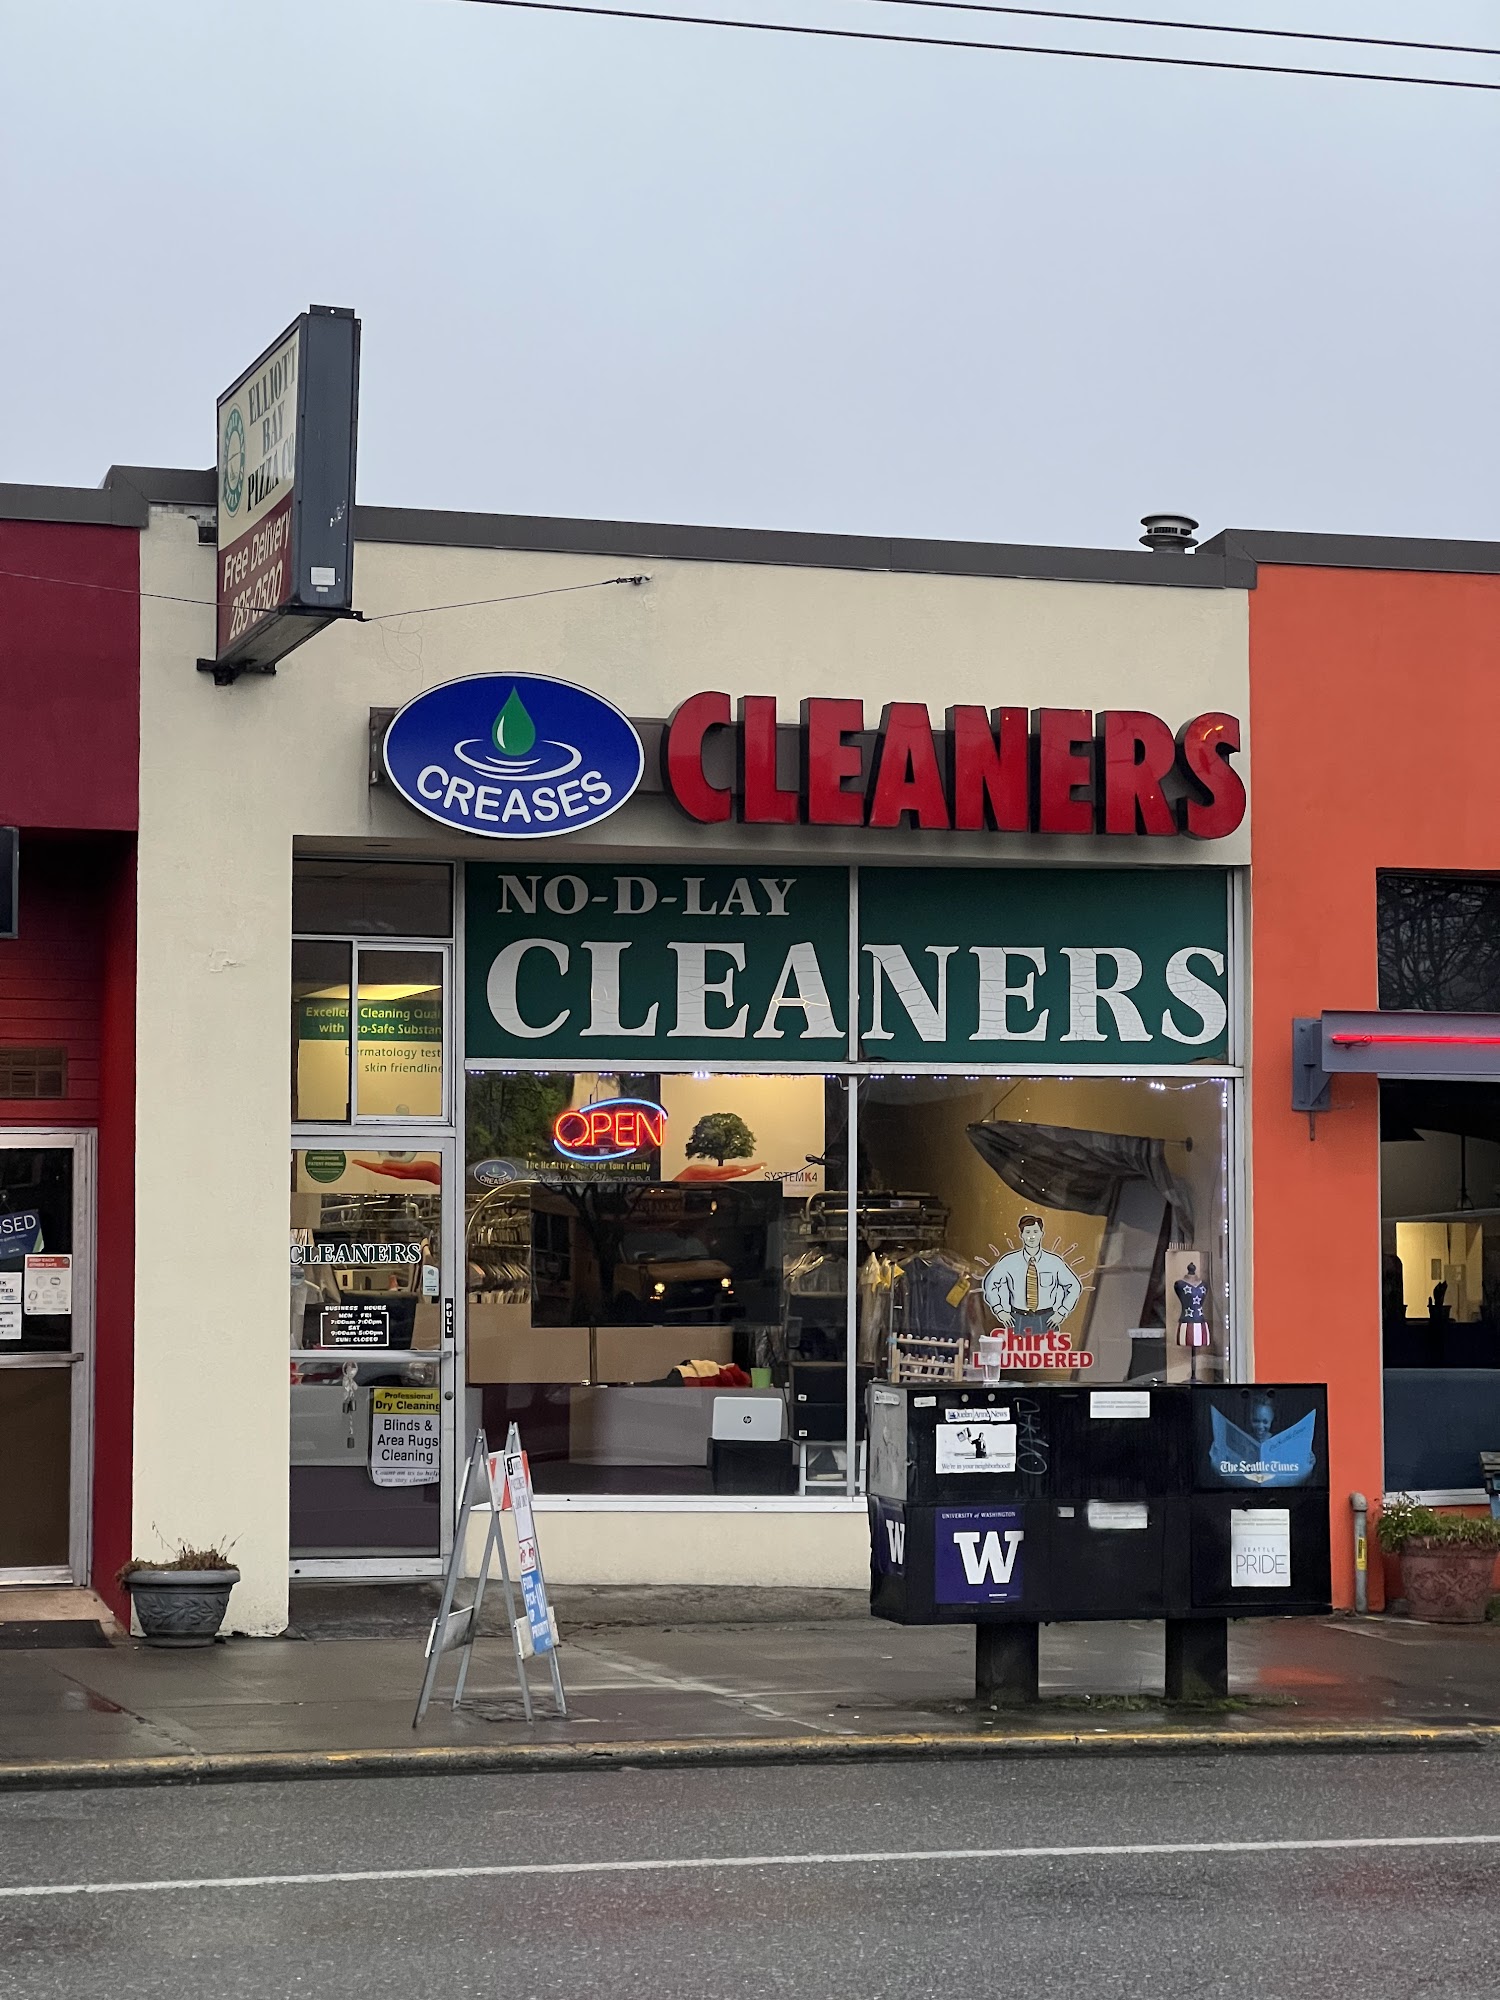 No-D-Lay Cleaners